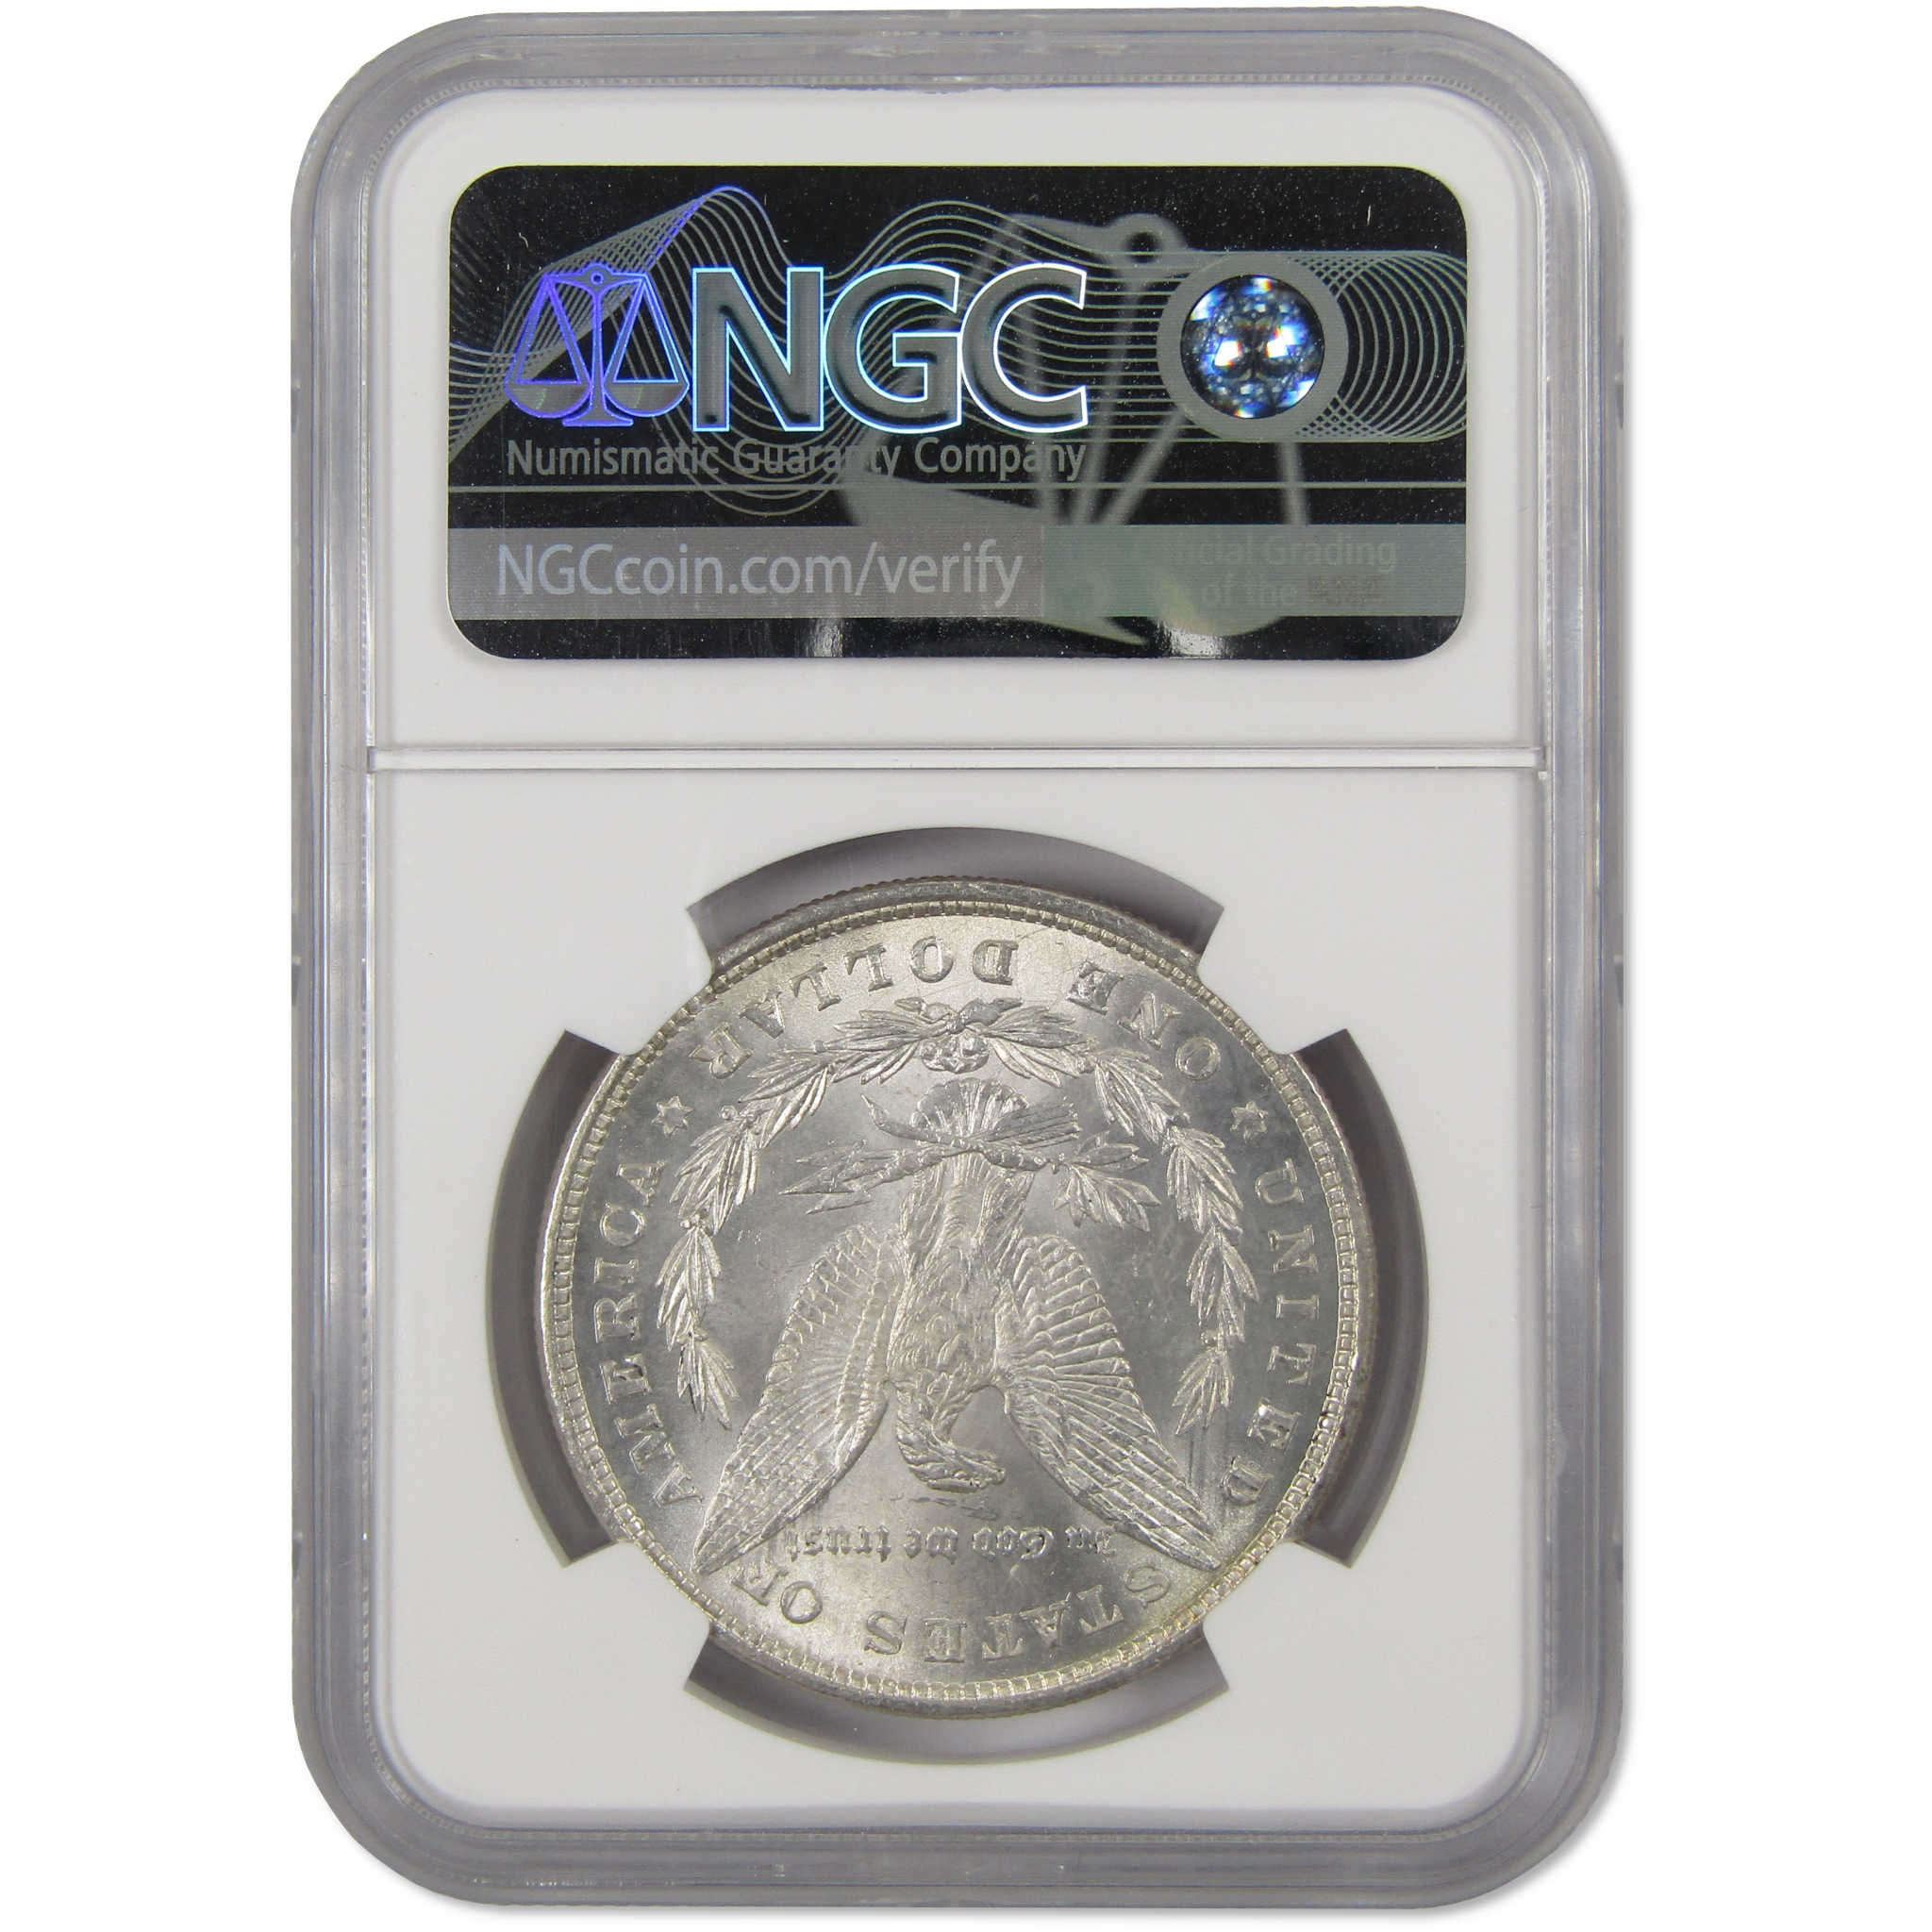 1878 8TF Morgan Dollar MS 61 NGC Silver $1 Uncirculated Coin SKU:I8302 - Morgan coin - Morgan silver dollar - Morgan silver dollar for sale - Profile Coins &amp; Collectibles